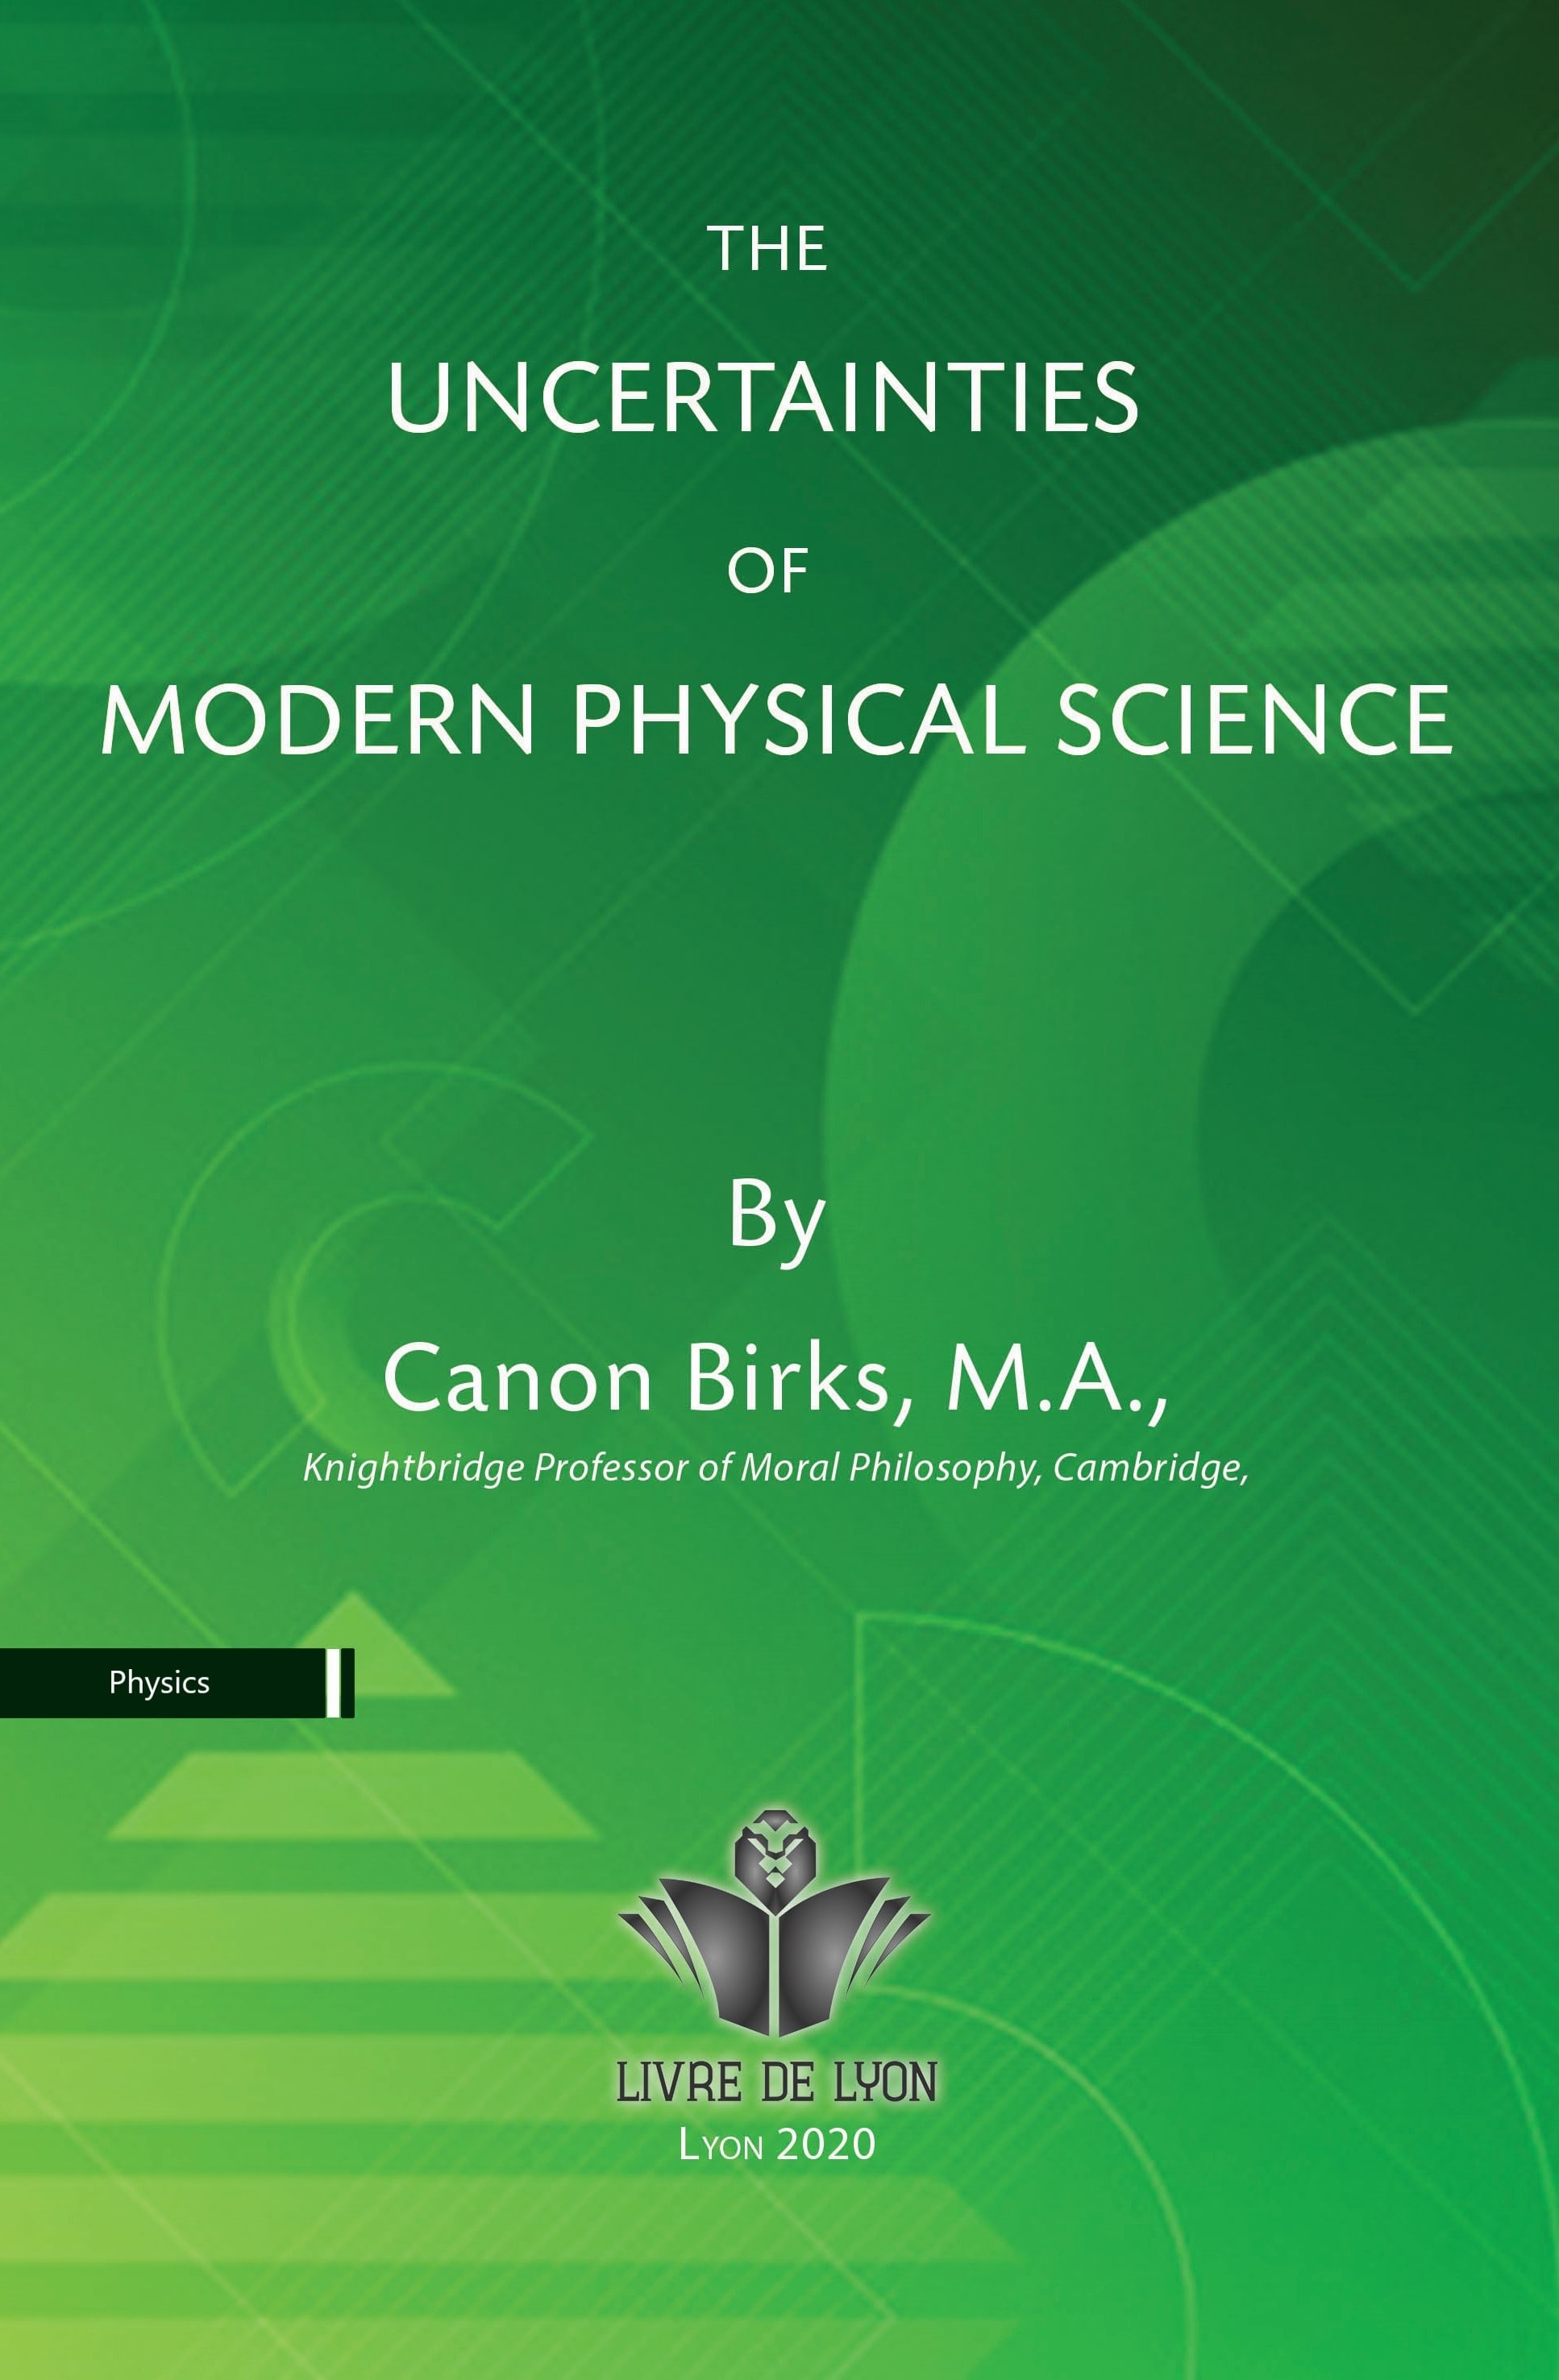 The Uncertainties of Modern Physical Science